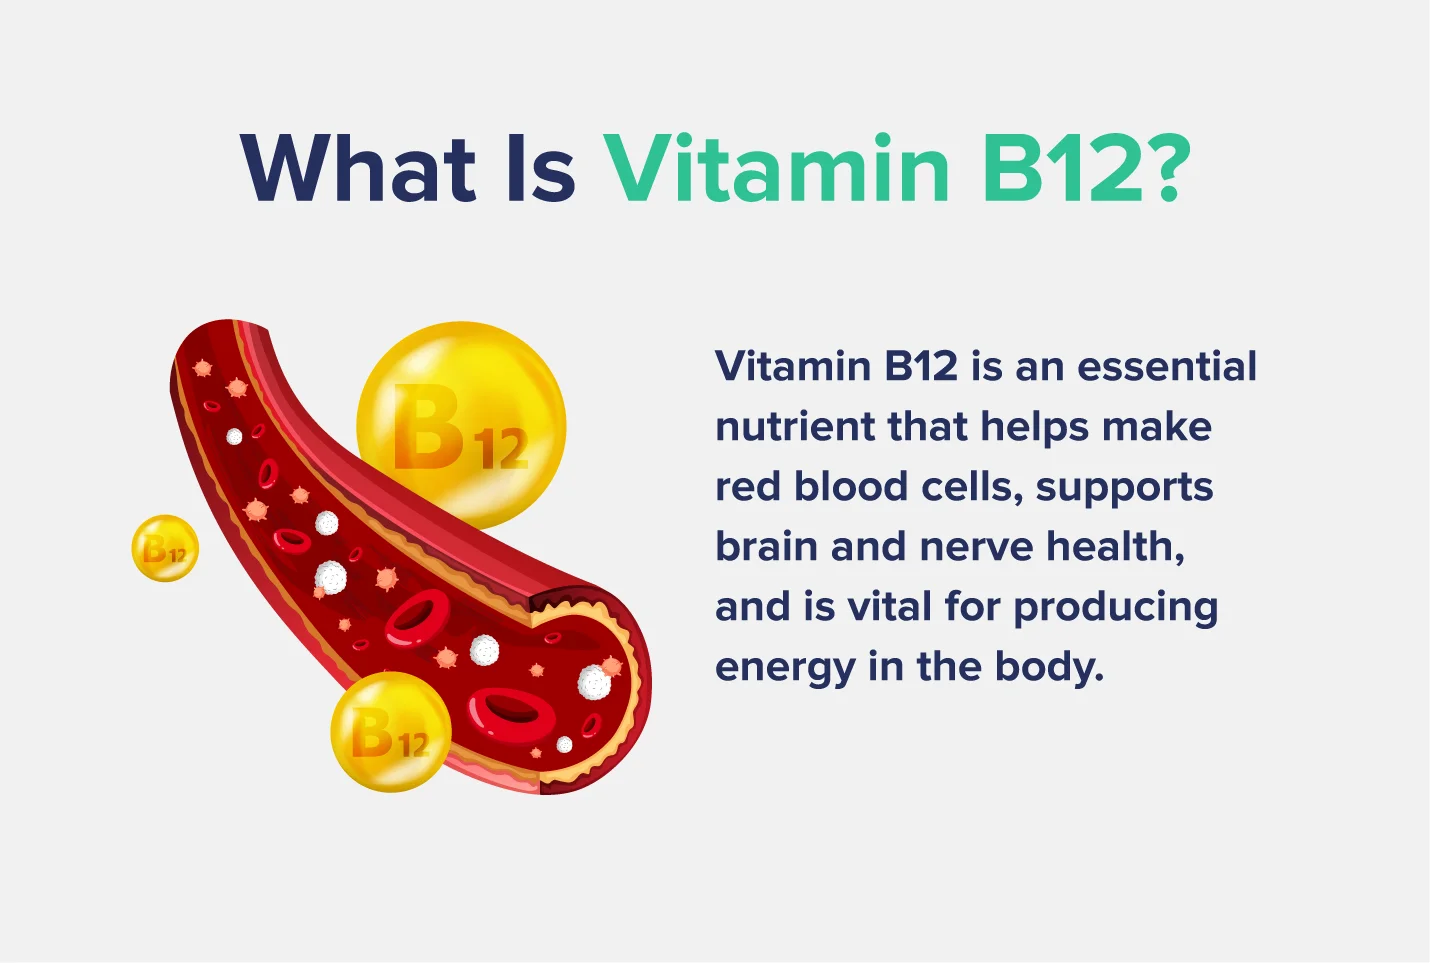 What Is Vitamin B12?Vitamin B12 is an essential nutrient that helps make red blood cells, supports brain and nerve health, and is vital for producing energy in the body.